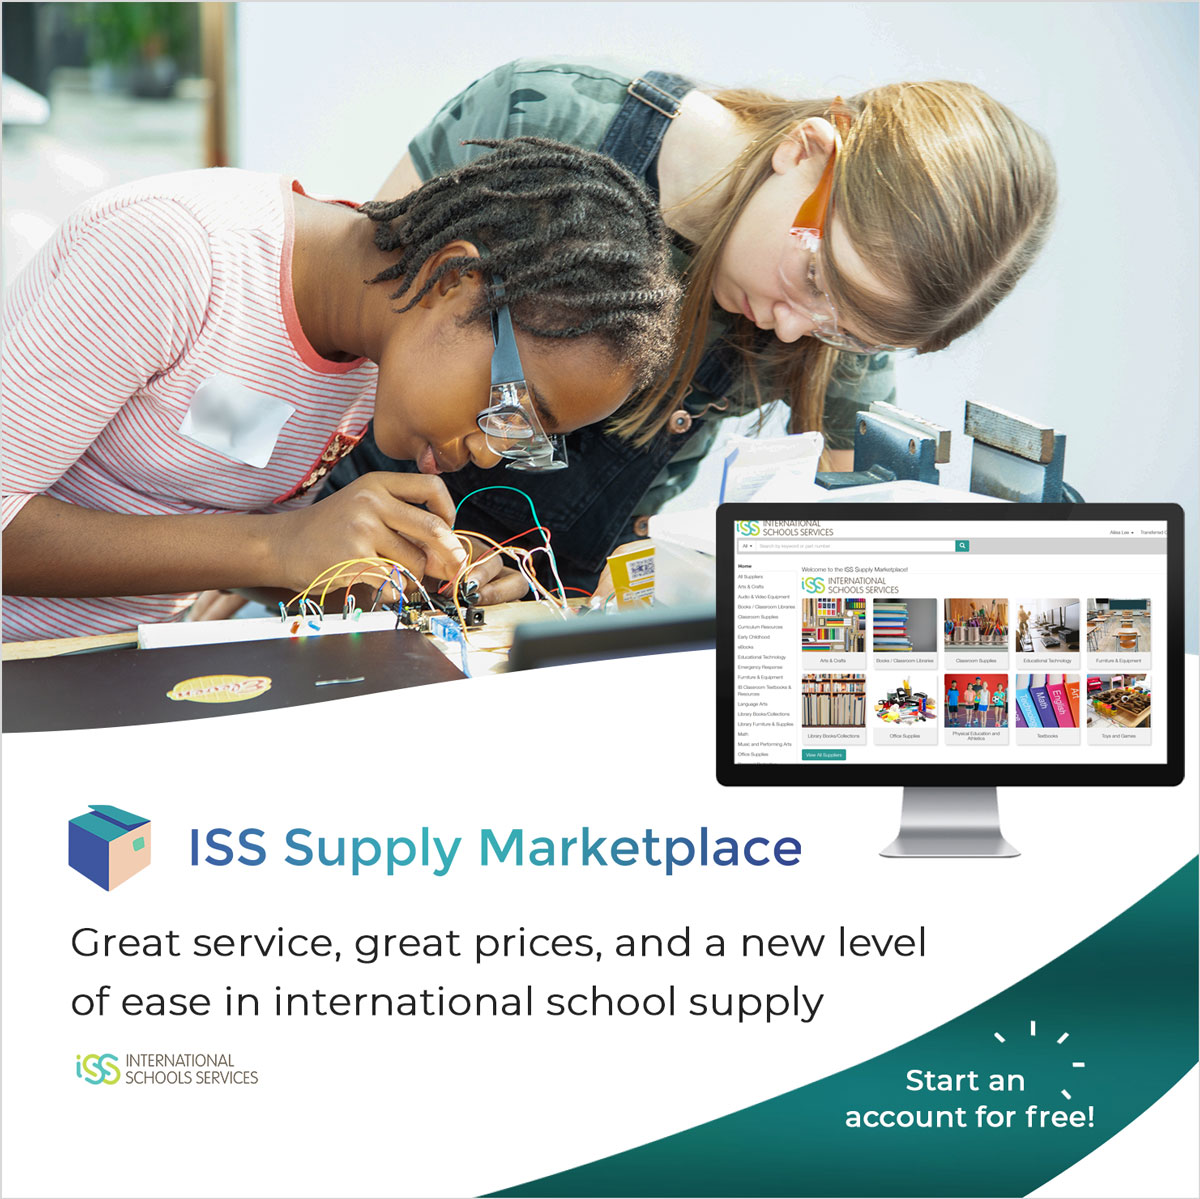 Forgot to order something for the 2024-25 school year? We can help! Enjoy hallmark customer service with the ISS School Supply team, plus save time and budget with the ISS Supply Marketplace. Get started for free at iss.education/supply #ISSedu #SchoolSupply